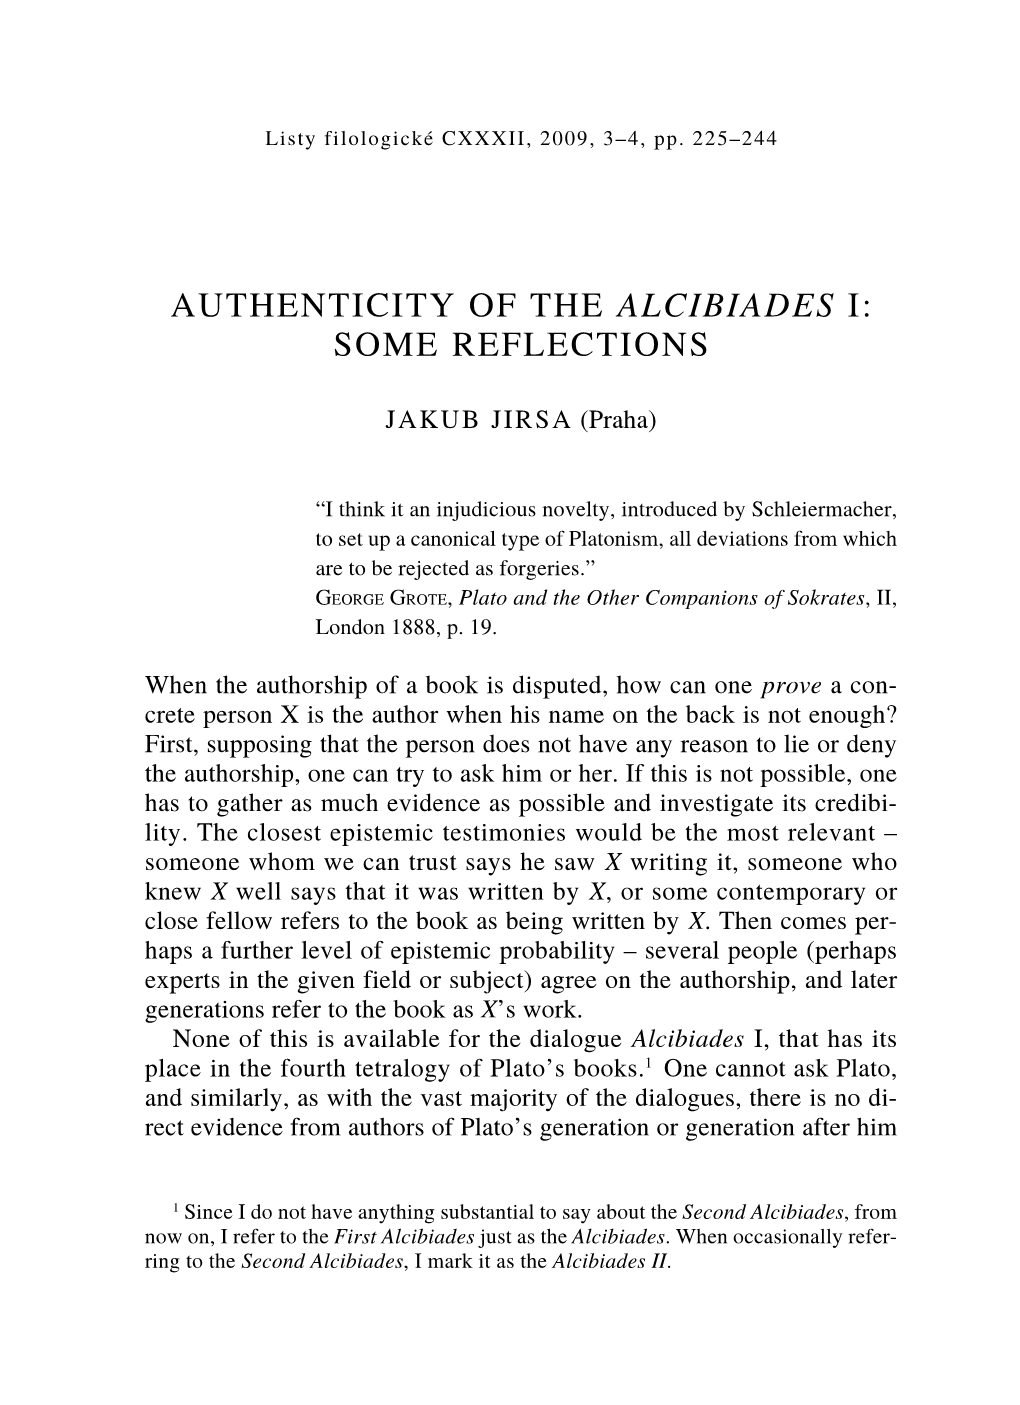 Authenticity of the Alcibiades I: Some Reflections